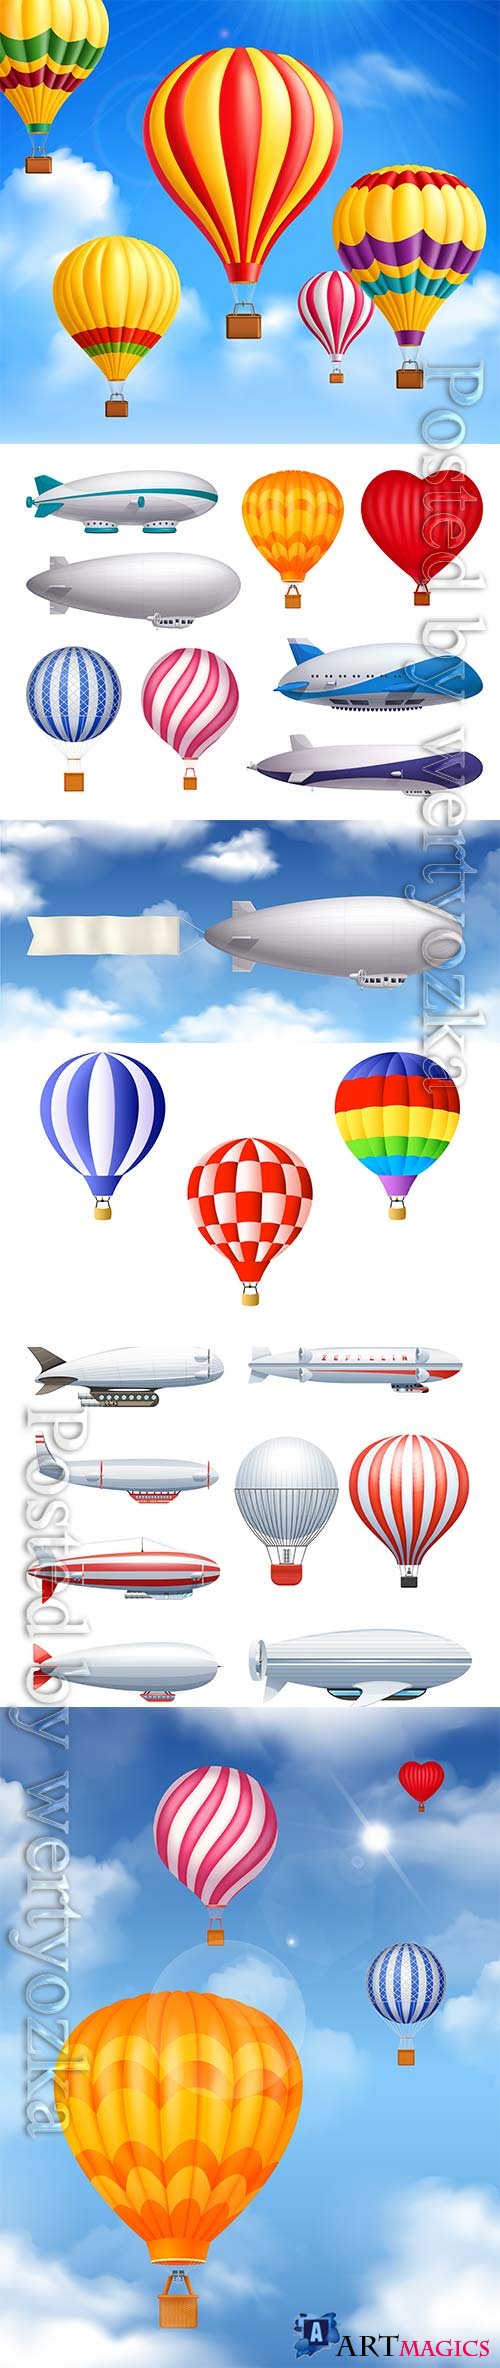 Dirigible and balloons transportation realistic vector set